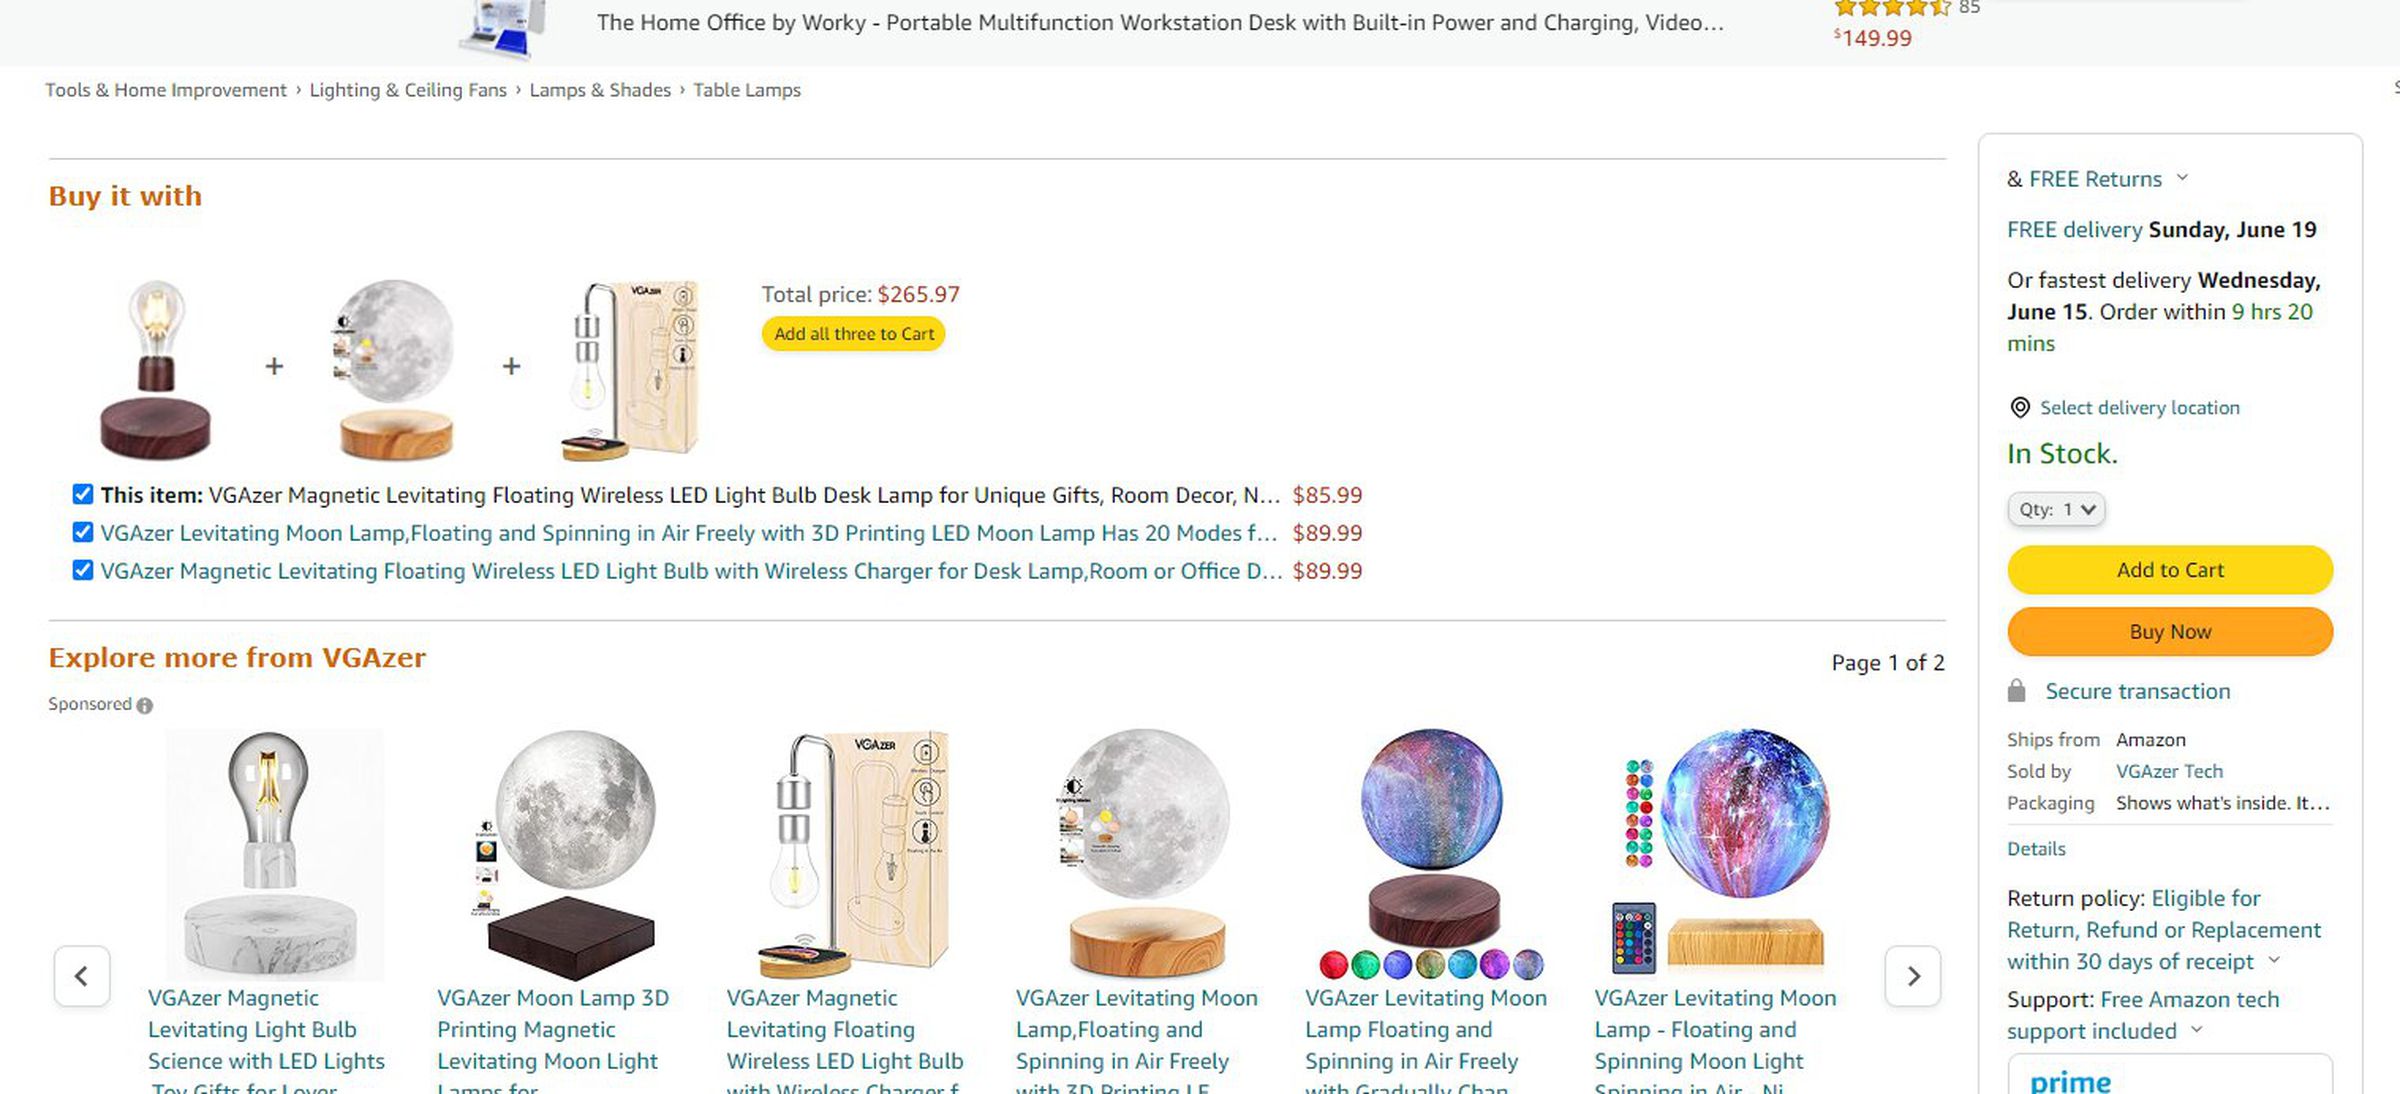 This Amazon page isn’t supposed to look like that.